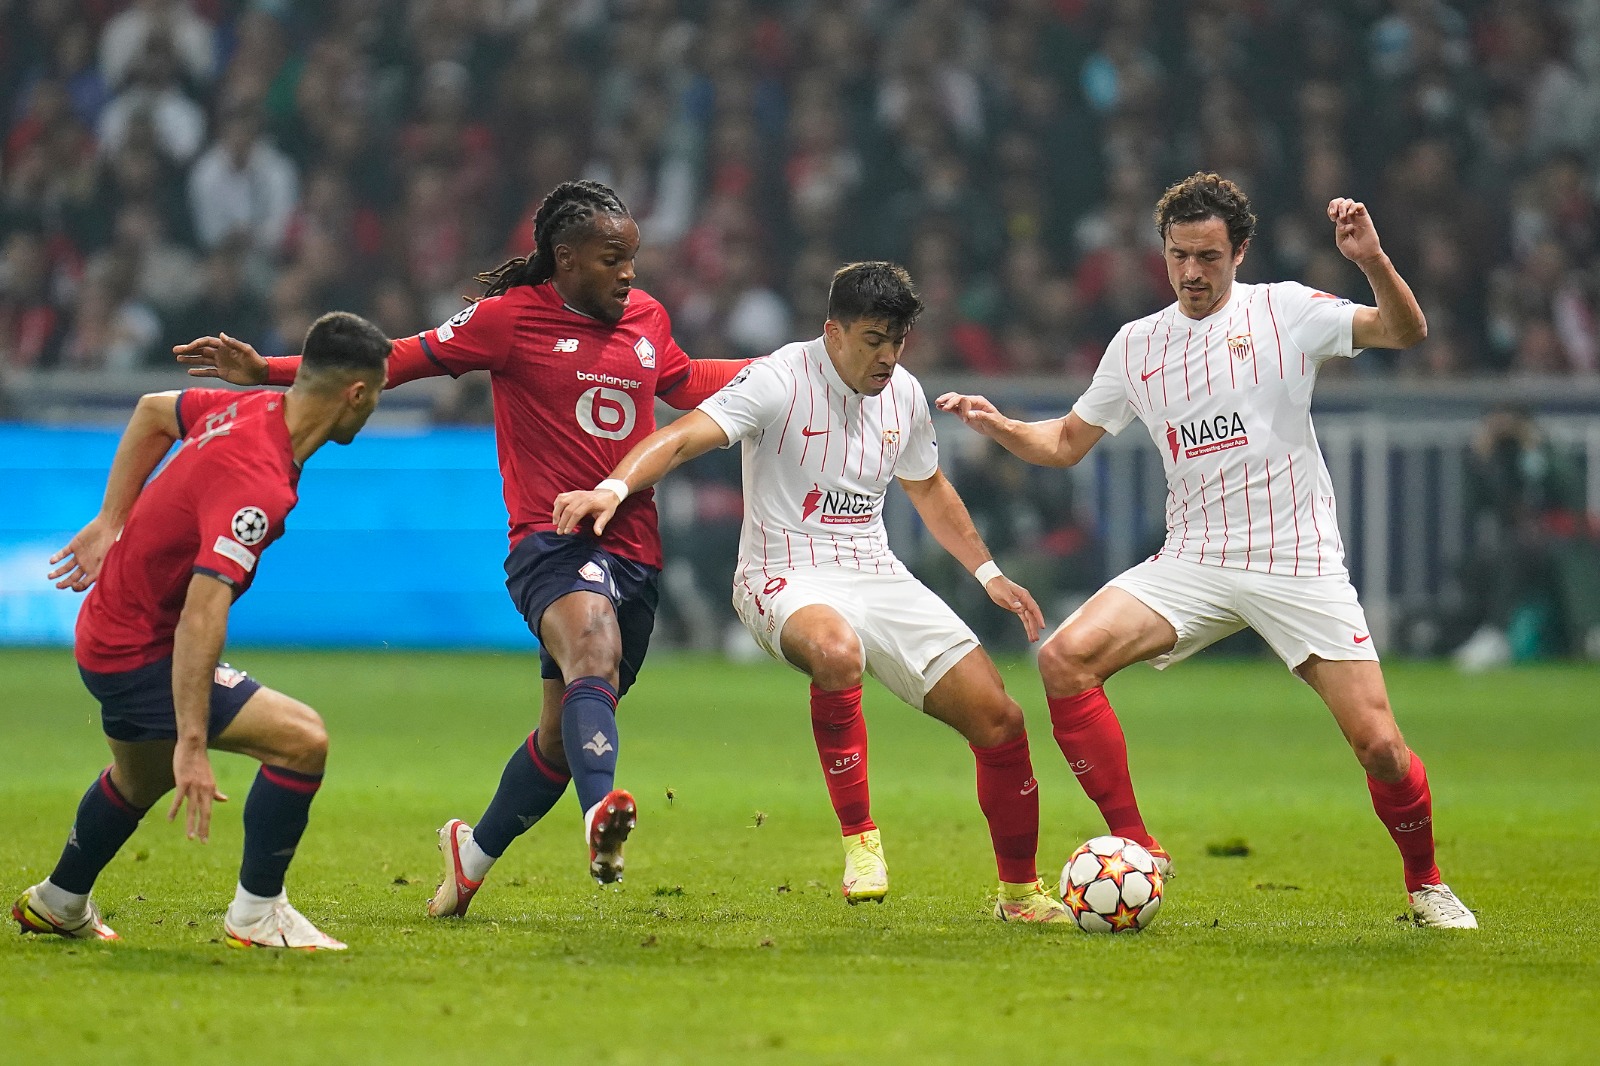 Action from LOSC Lille against Sevilla FC